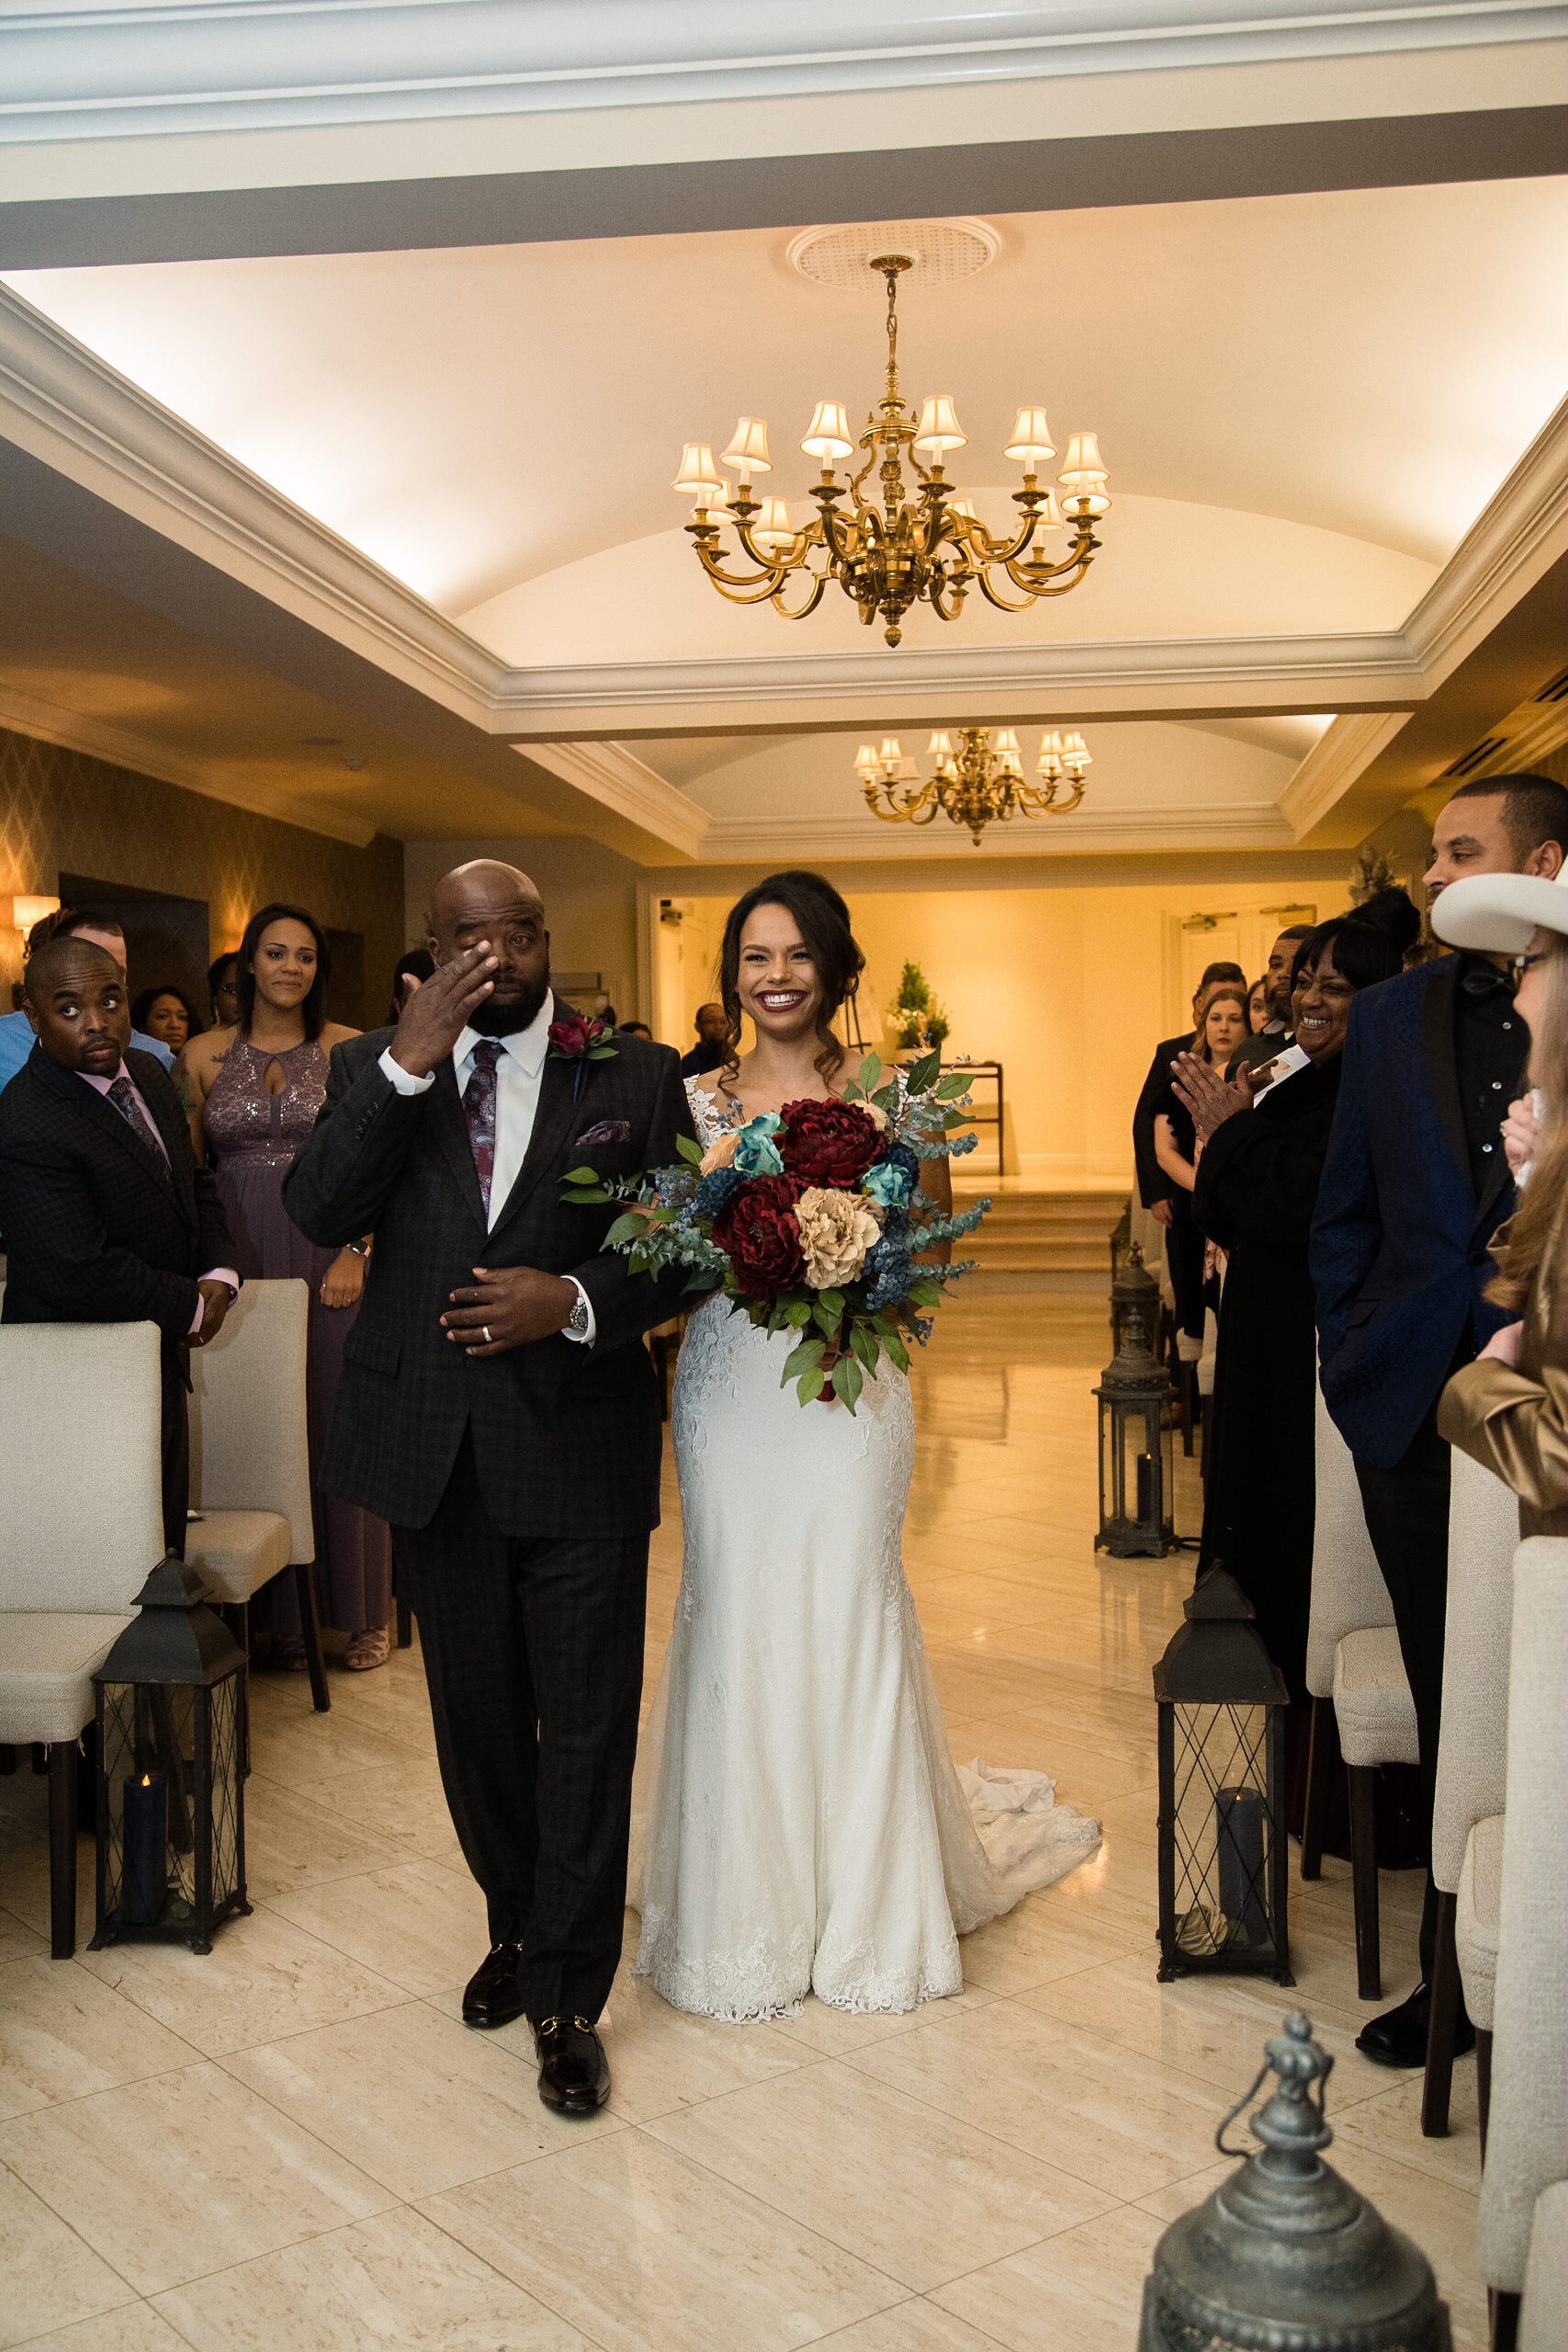  TX.

Monica Salazar is a Dallas, Darian and Holland's wedding at the Rosewood Mansion in Dallas